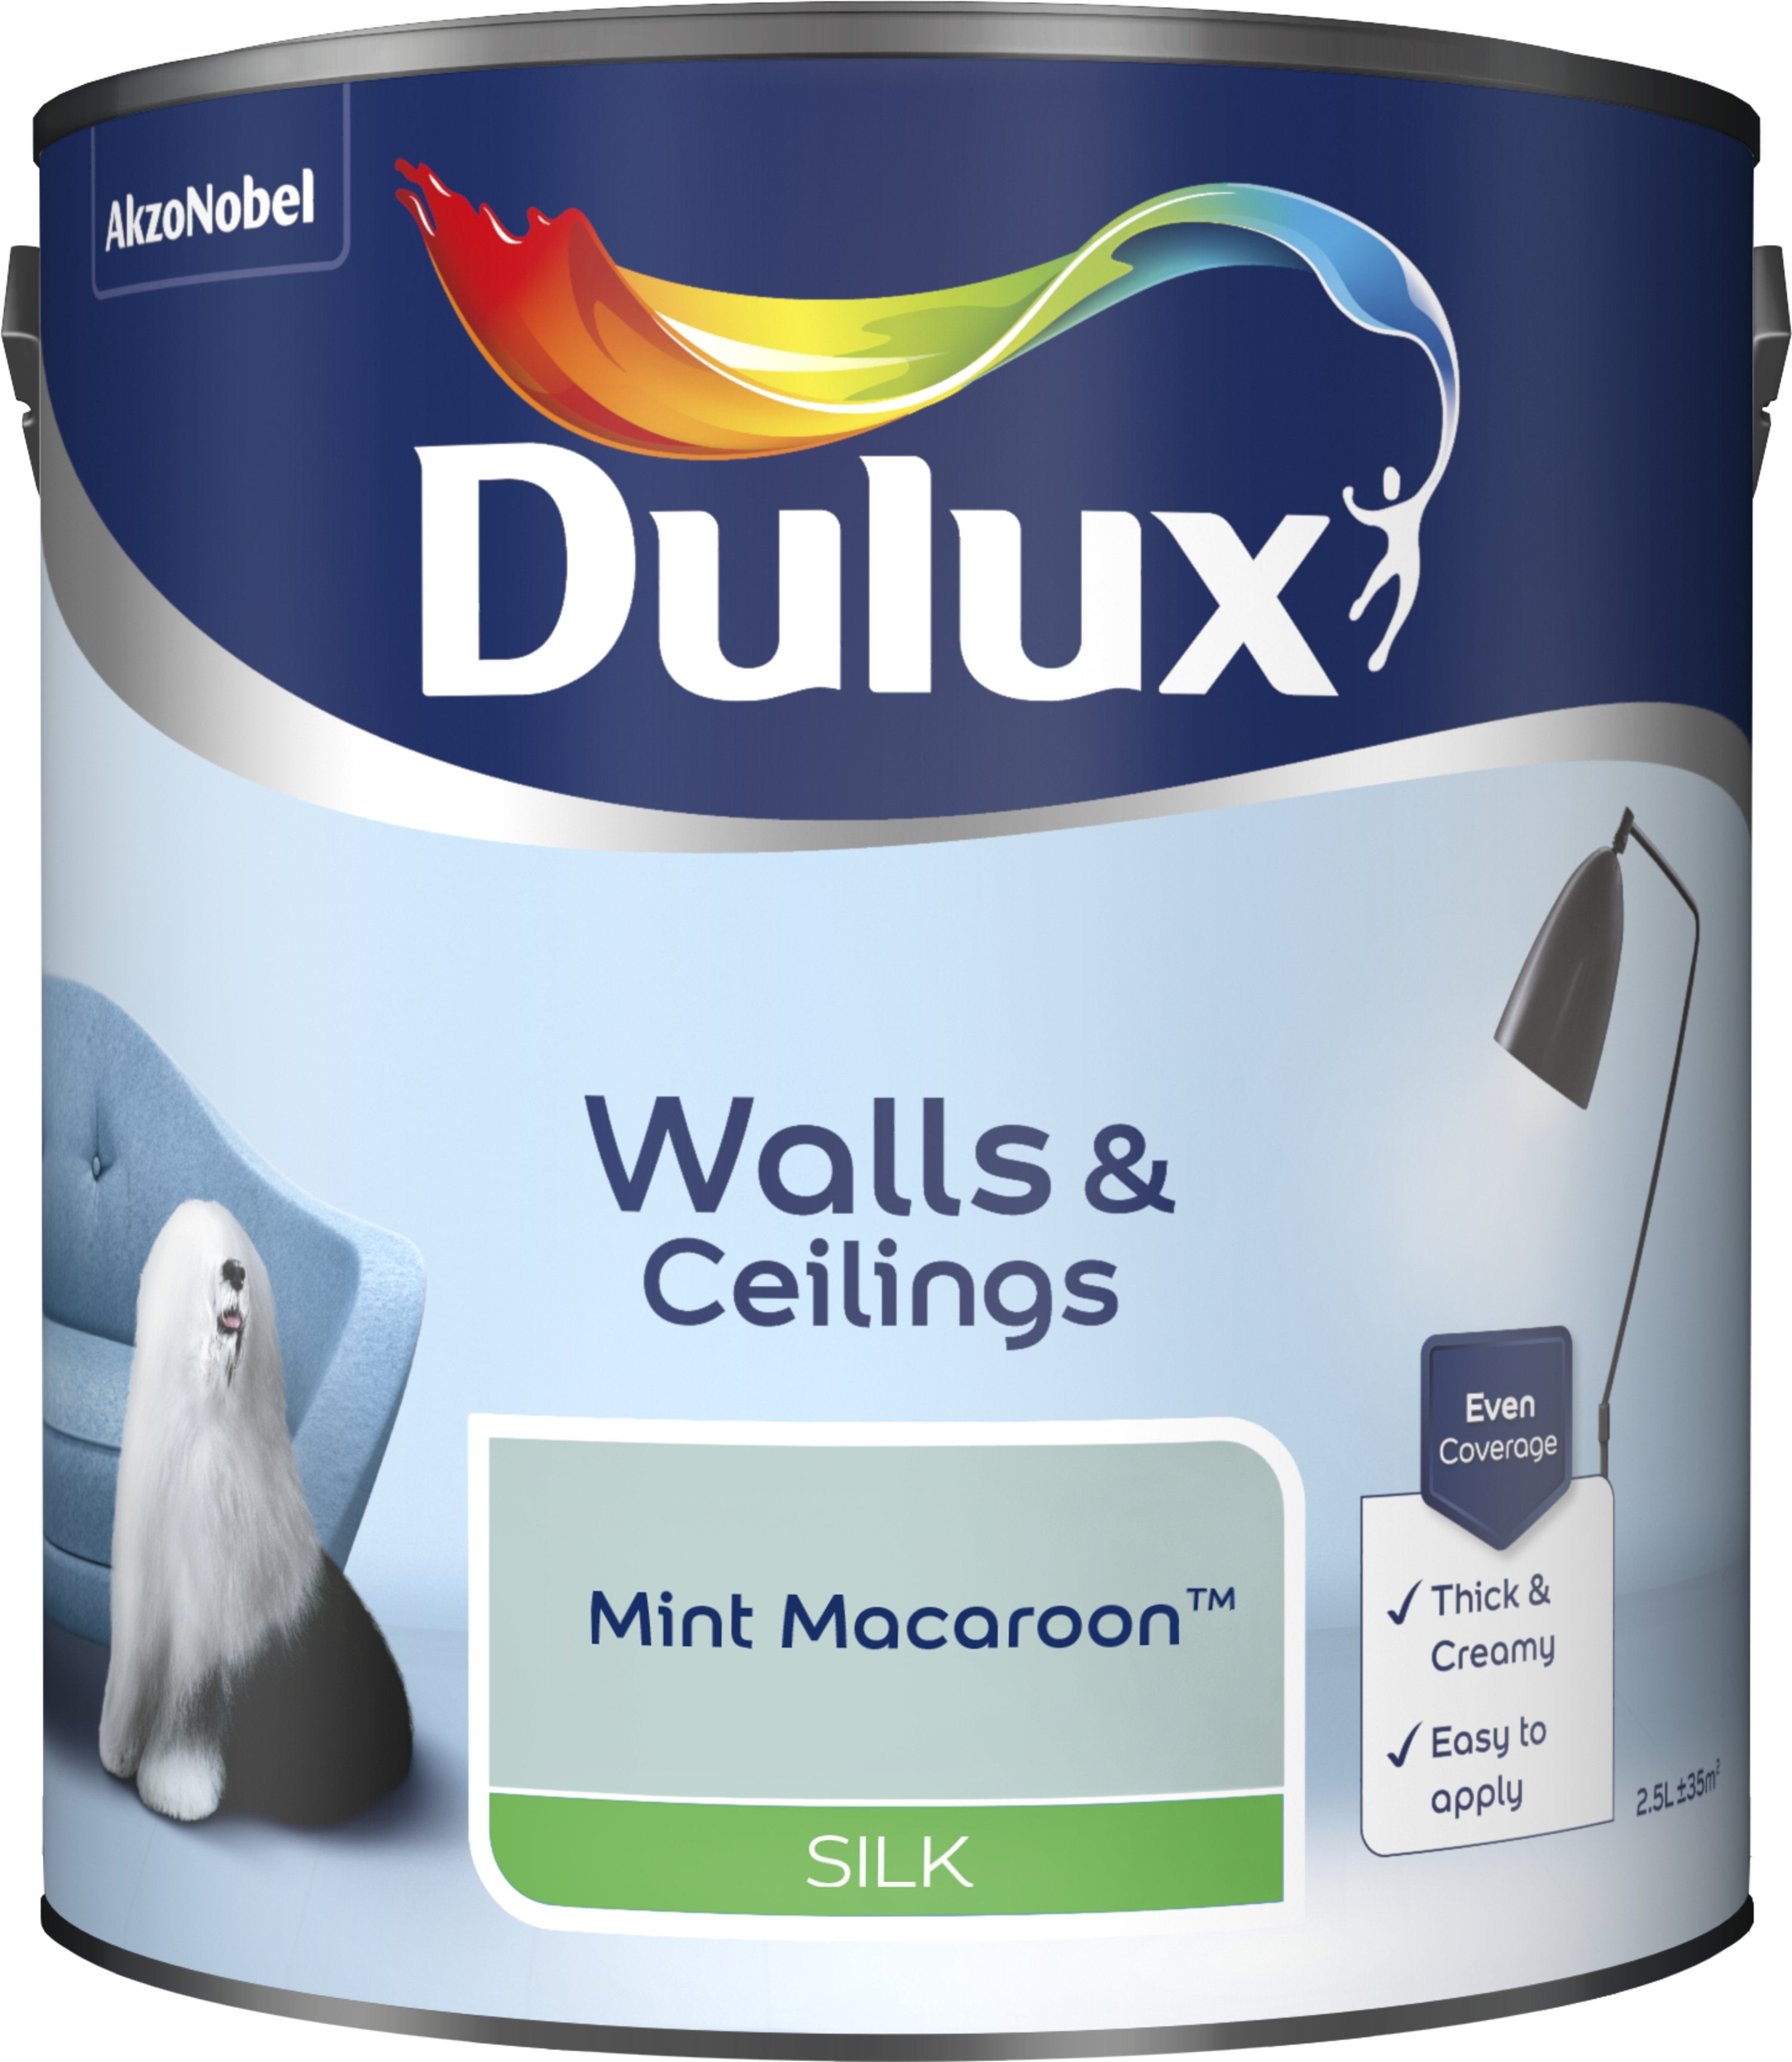 Dulux Silk Emulsion Paint For Walls And Ceilings - Mint Macaroon 2.5L Garden & Diy  Home